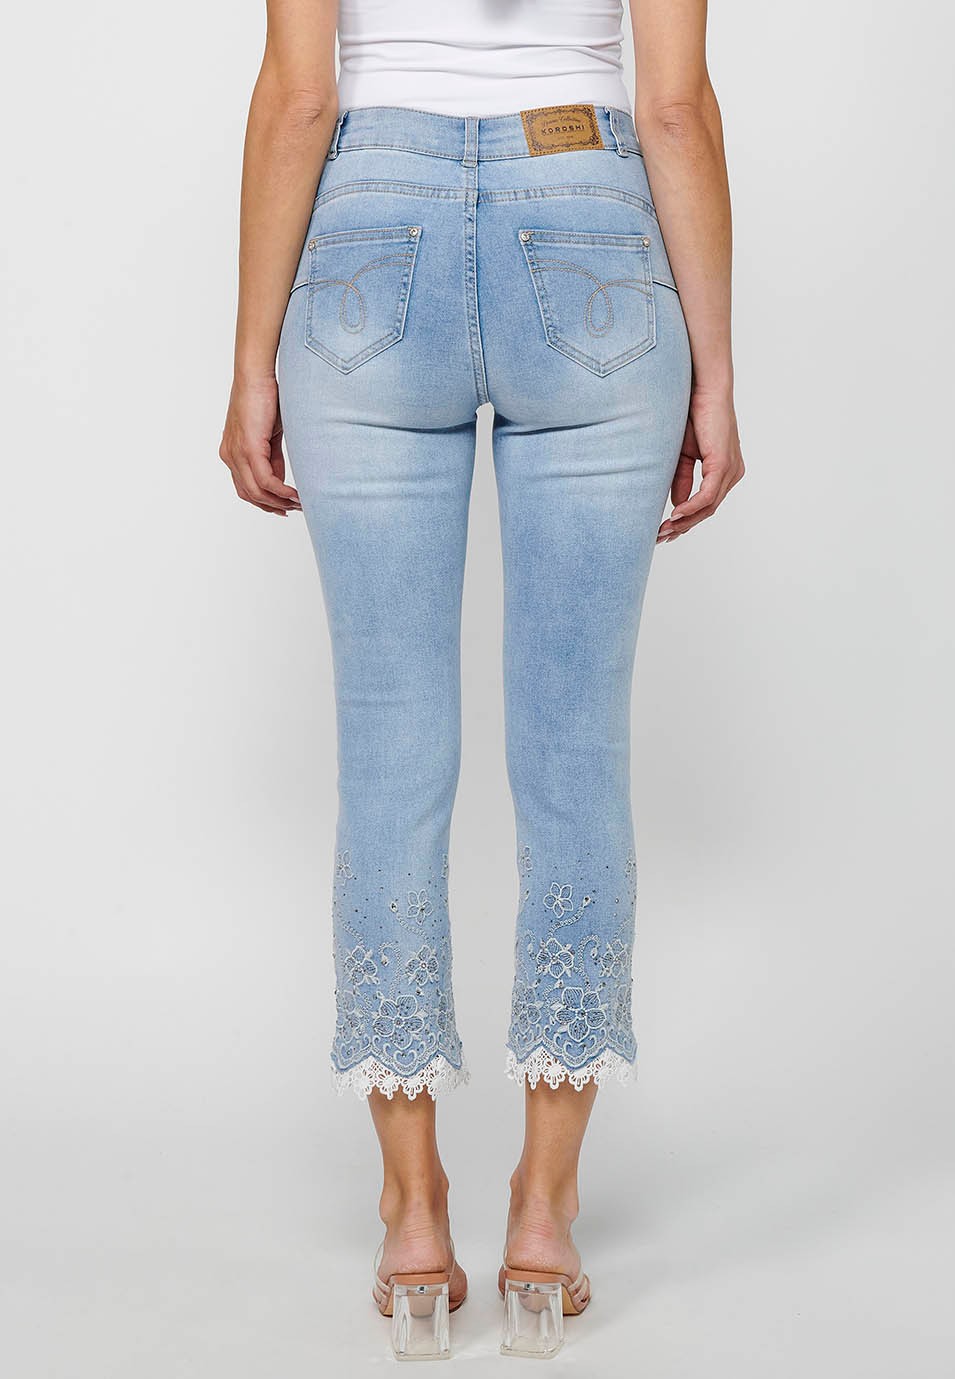 Long slim jeans pants with front zipper closure and light blue floral embroidered details for women 2